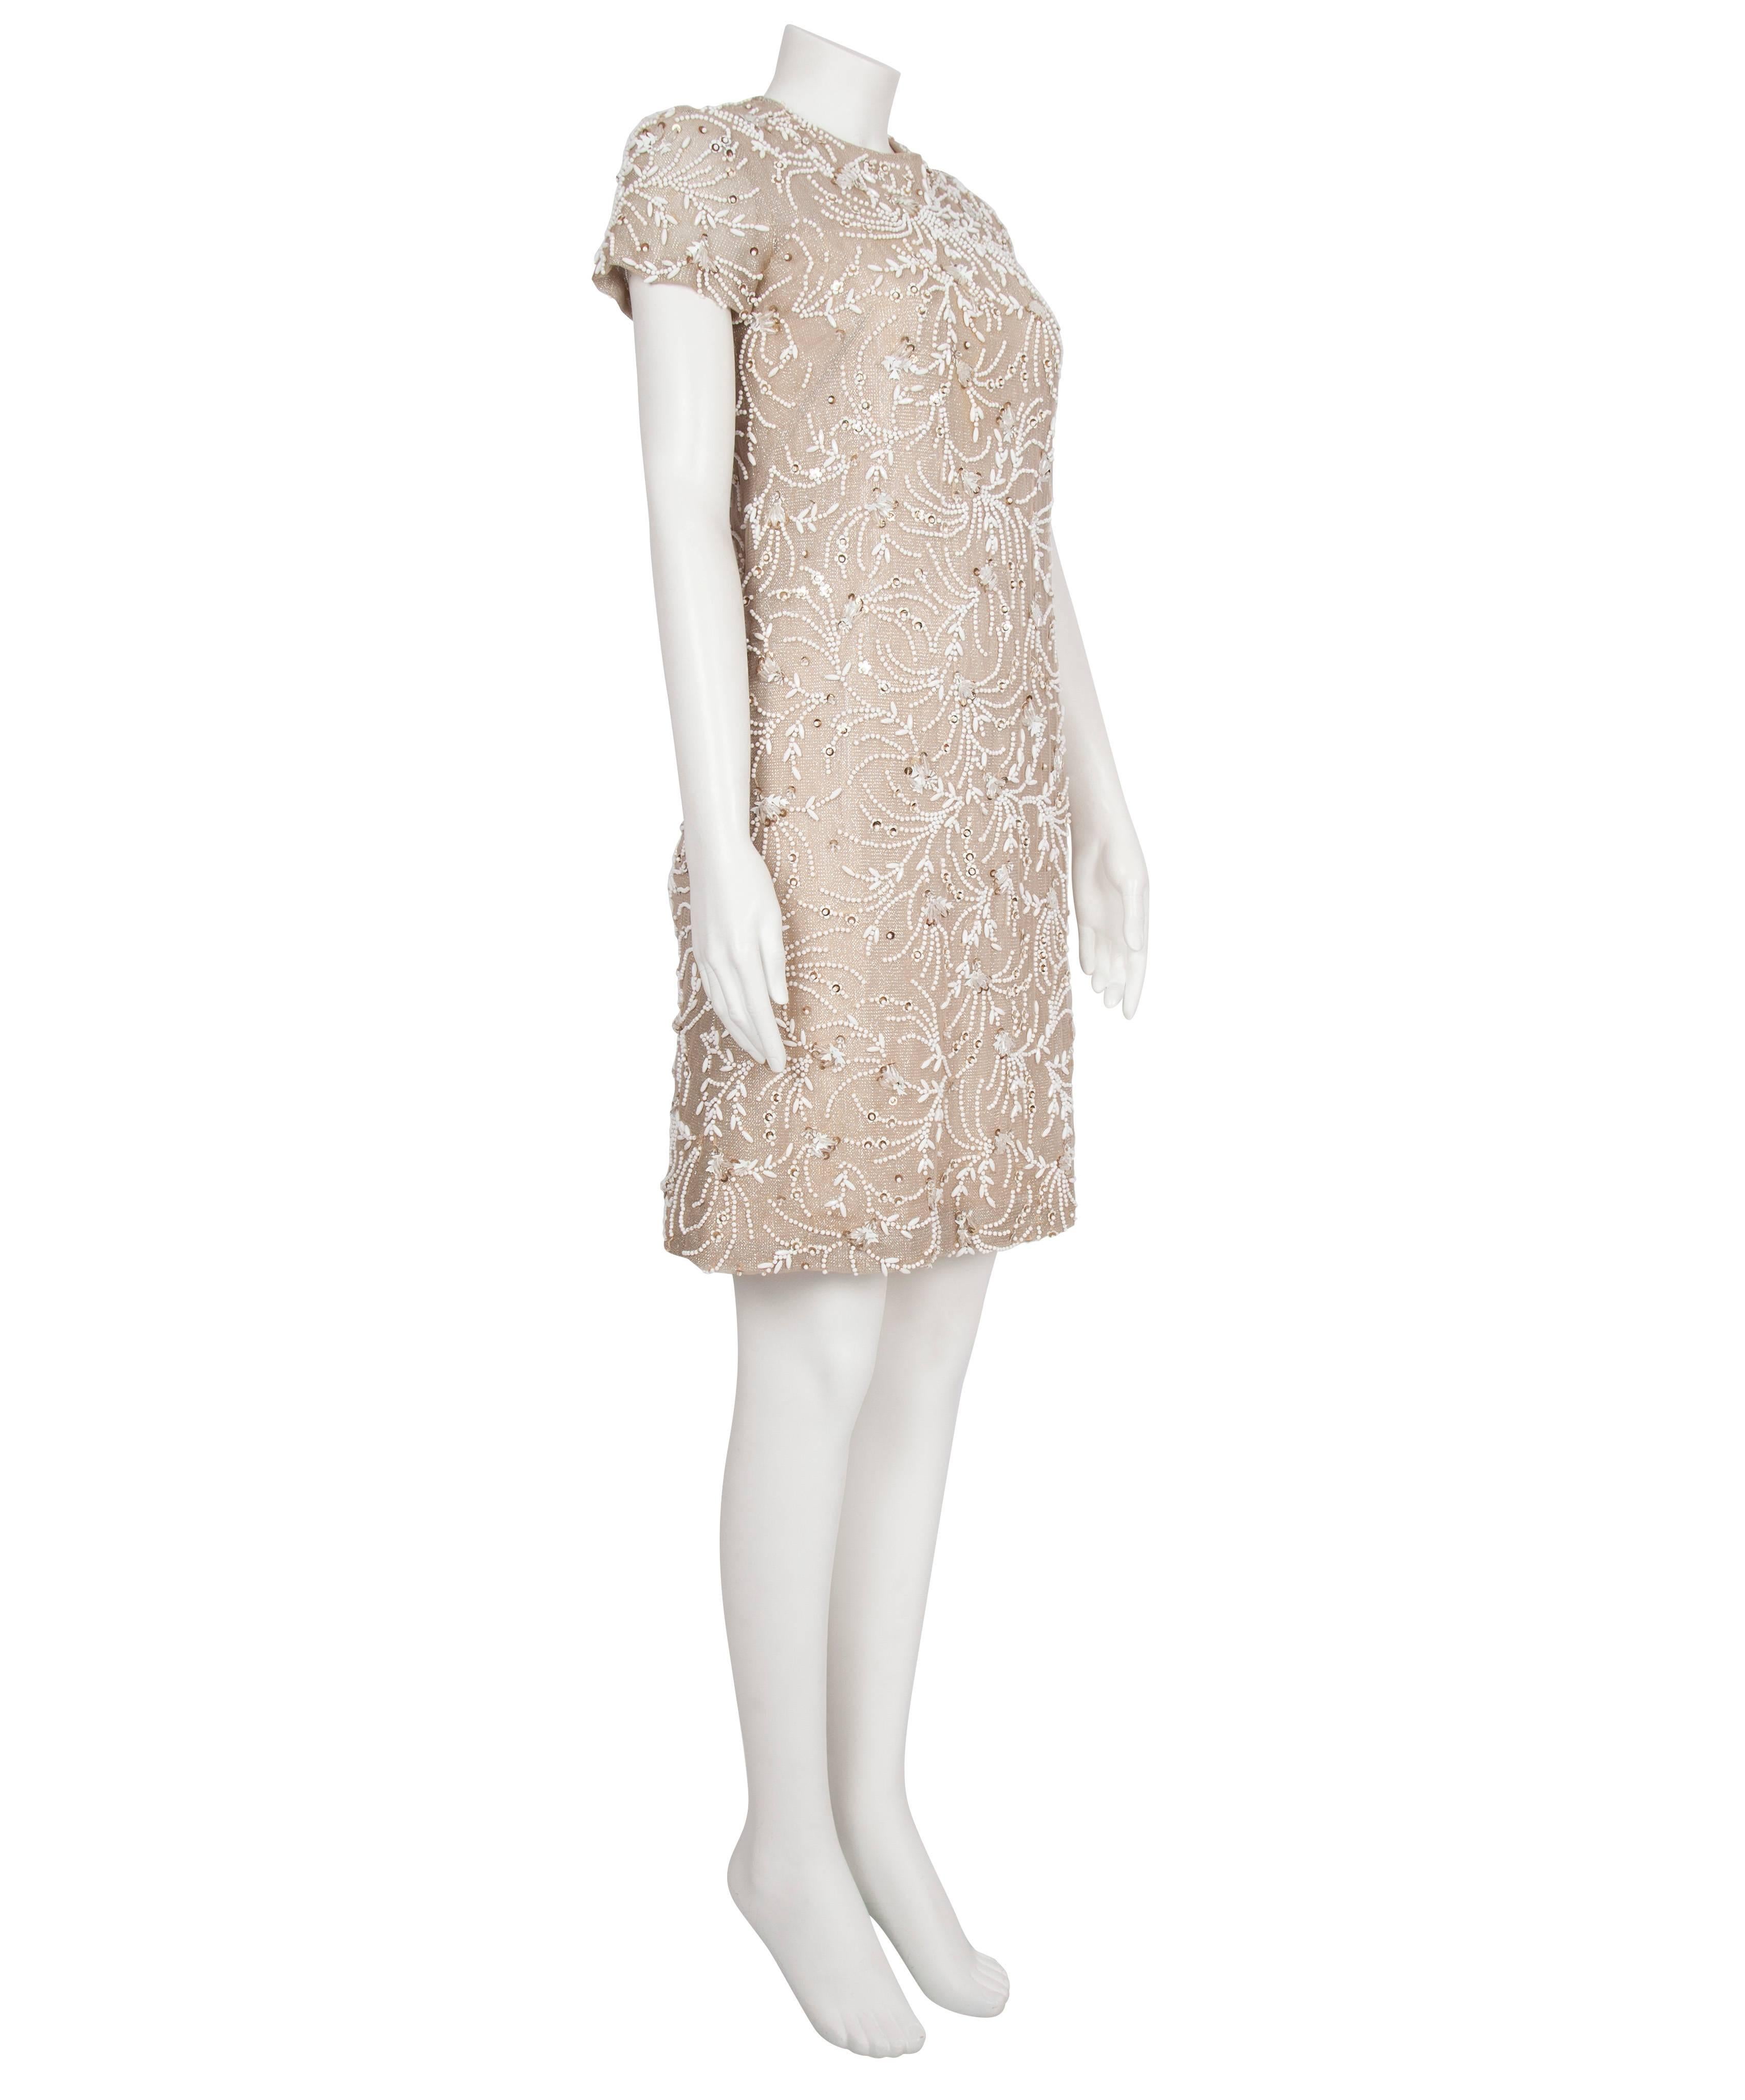 A classic Malcolm Starr 1960's cocktail dress, made from a champagne coloured chiffon covered with a metallic maille embellished with opaque ivory beads. The dress has a crew neck and cap sleeves, and fastens at the back with a zip and a row of